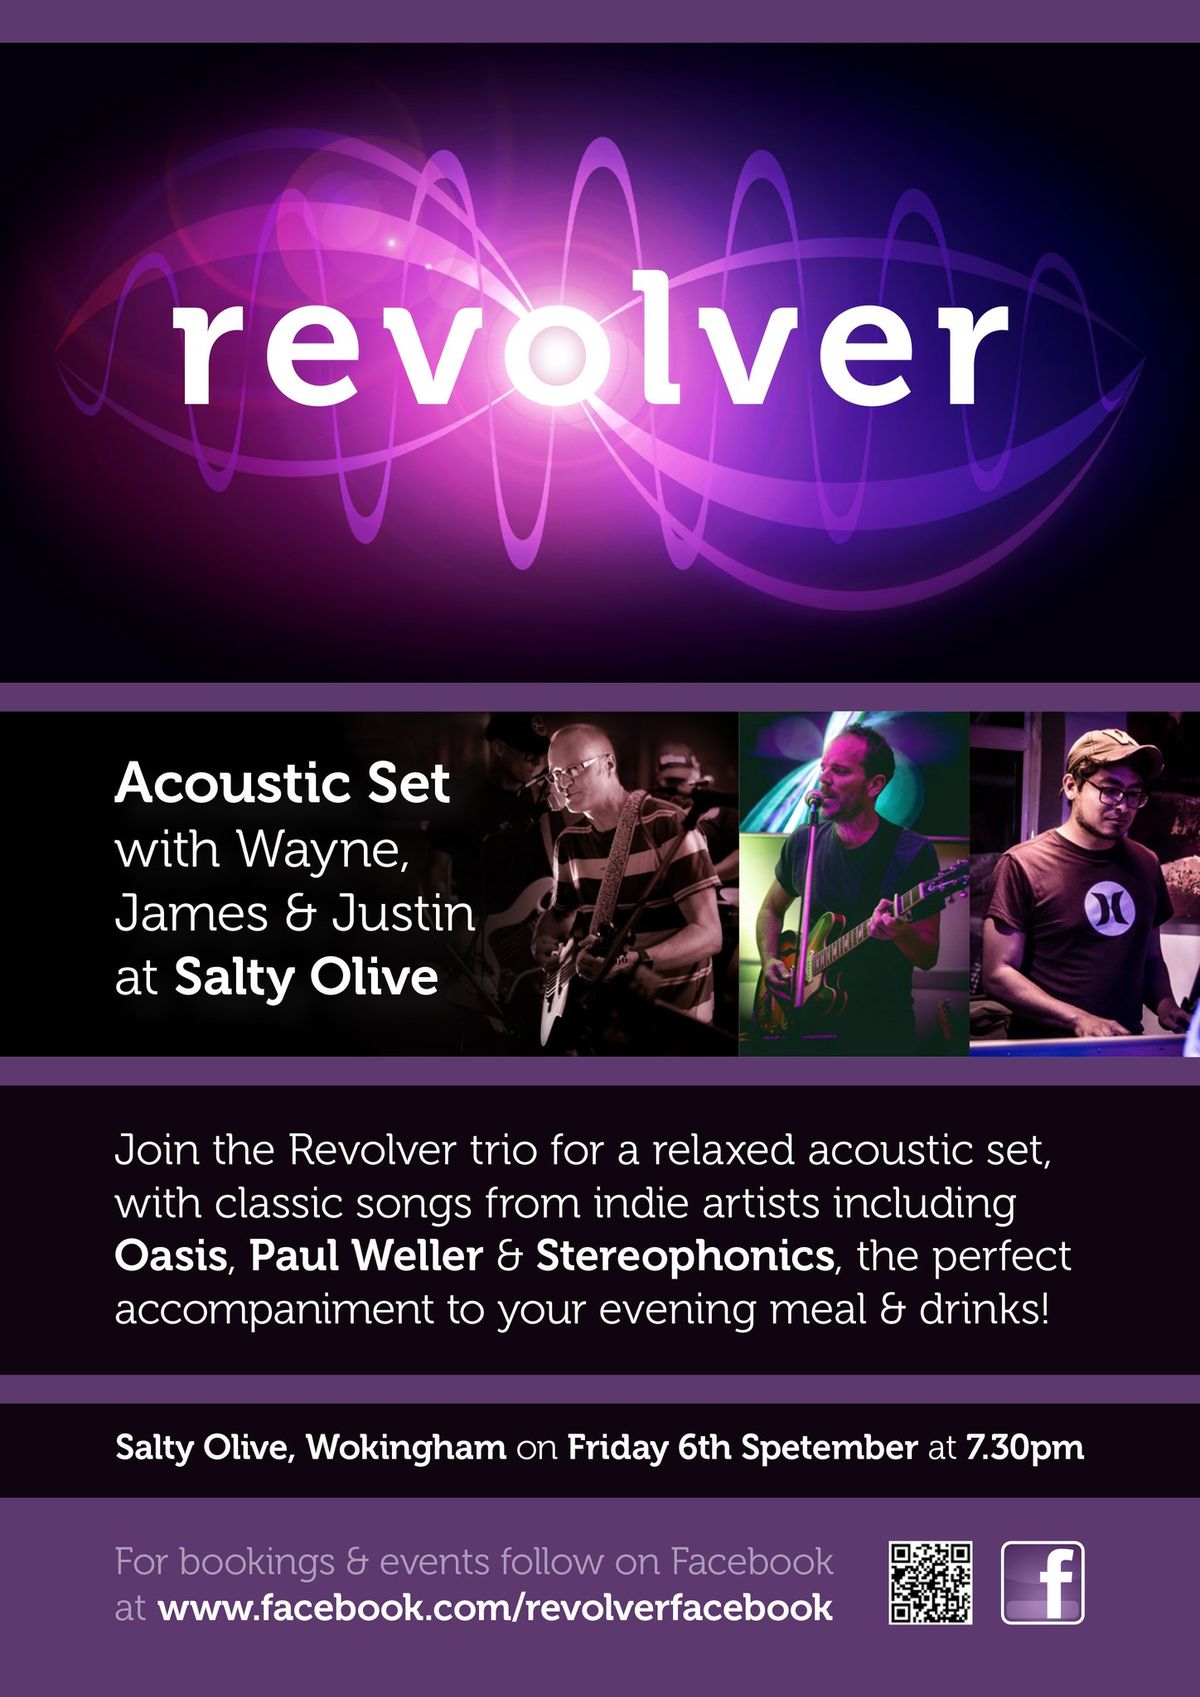 Revolver Gig - Acoustic Trio with Wayne, James & Justin at Salty Olive - 7.30pm